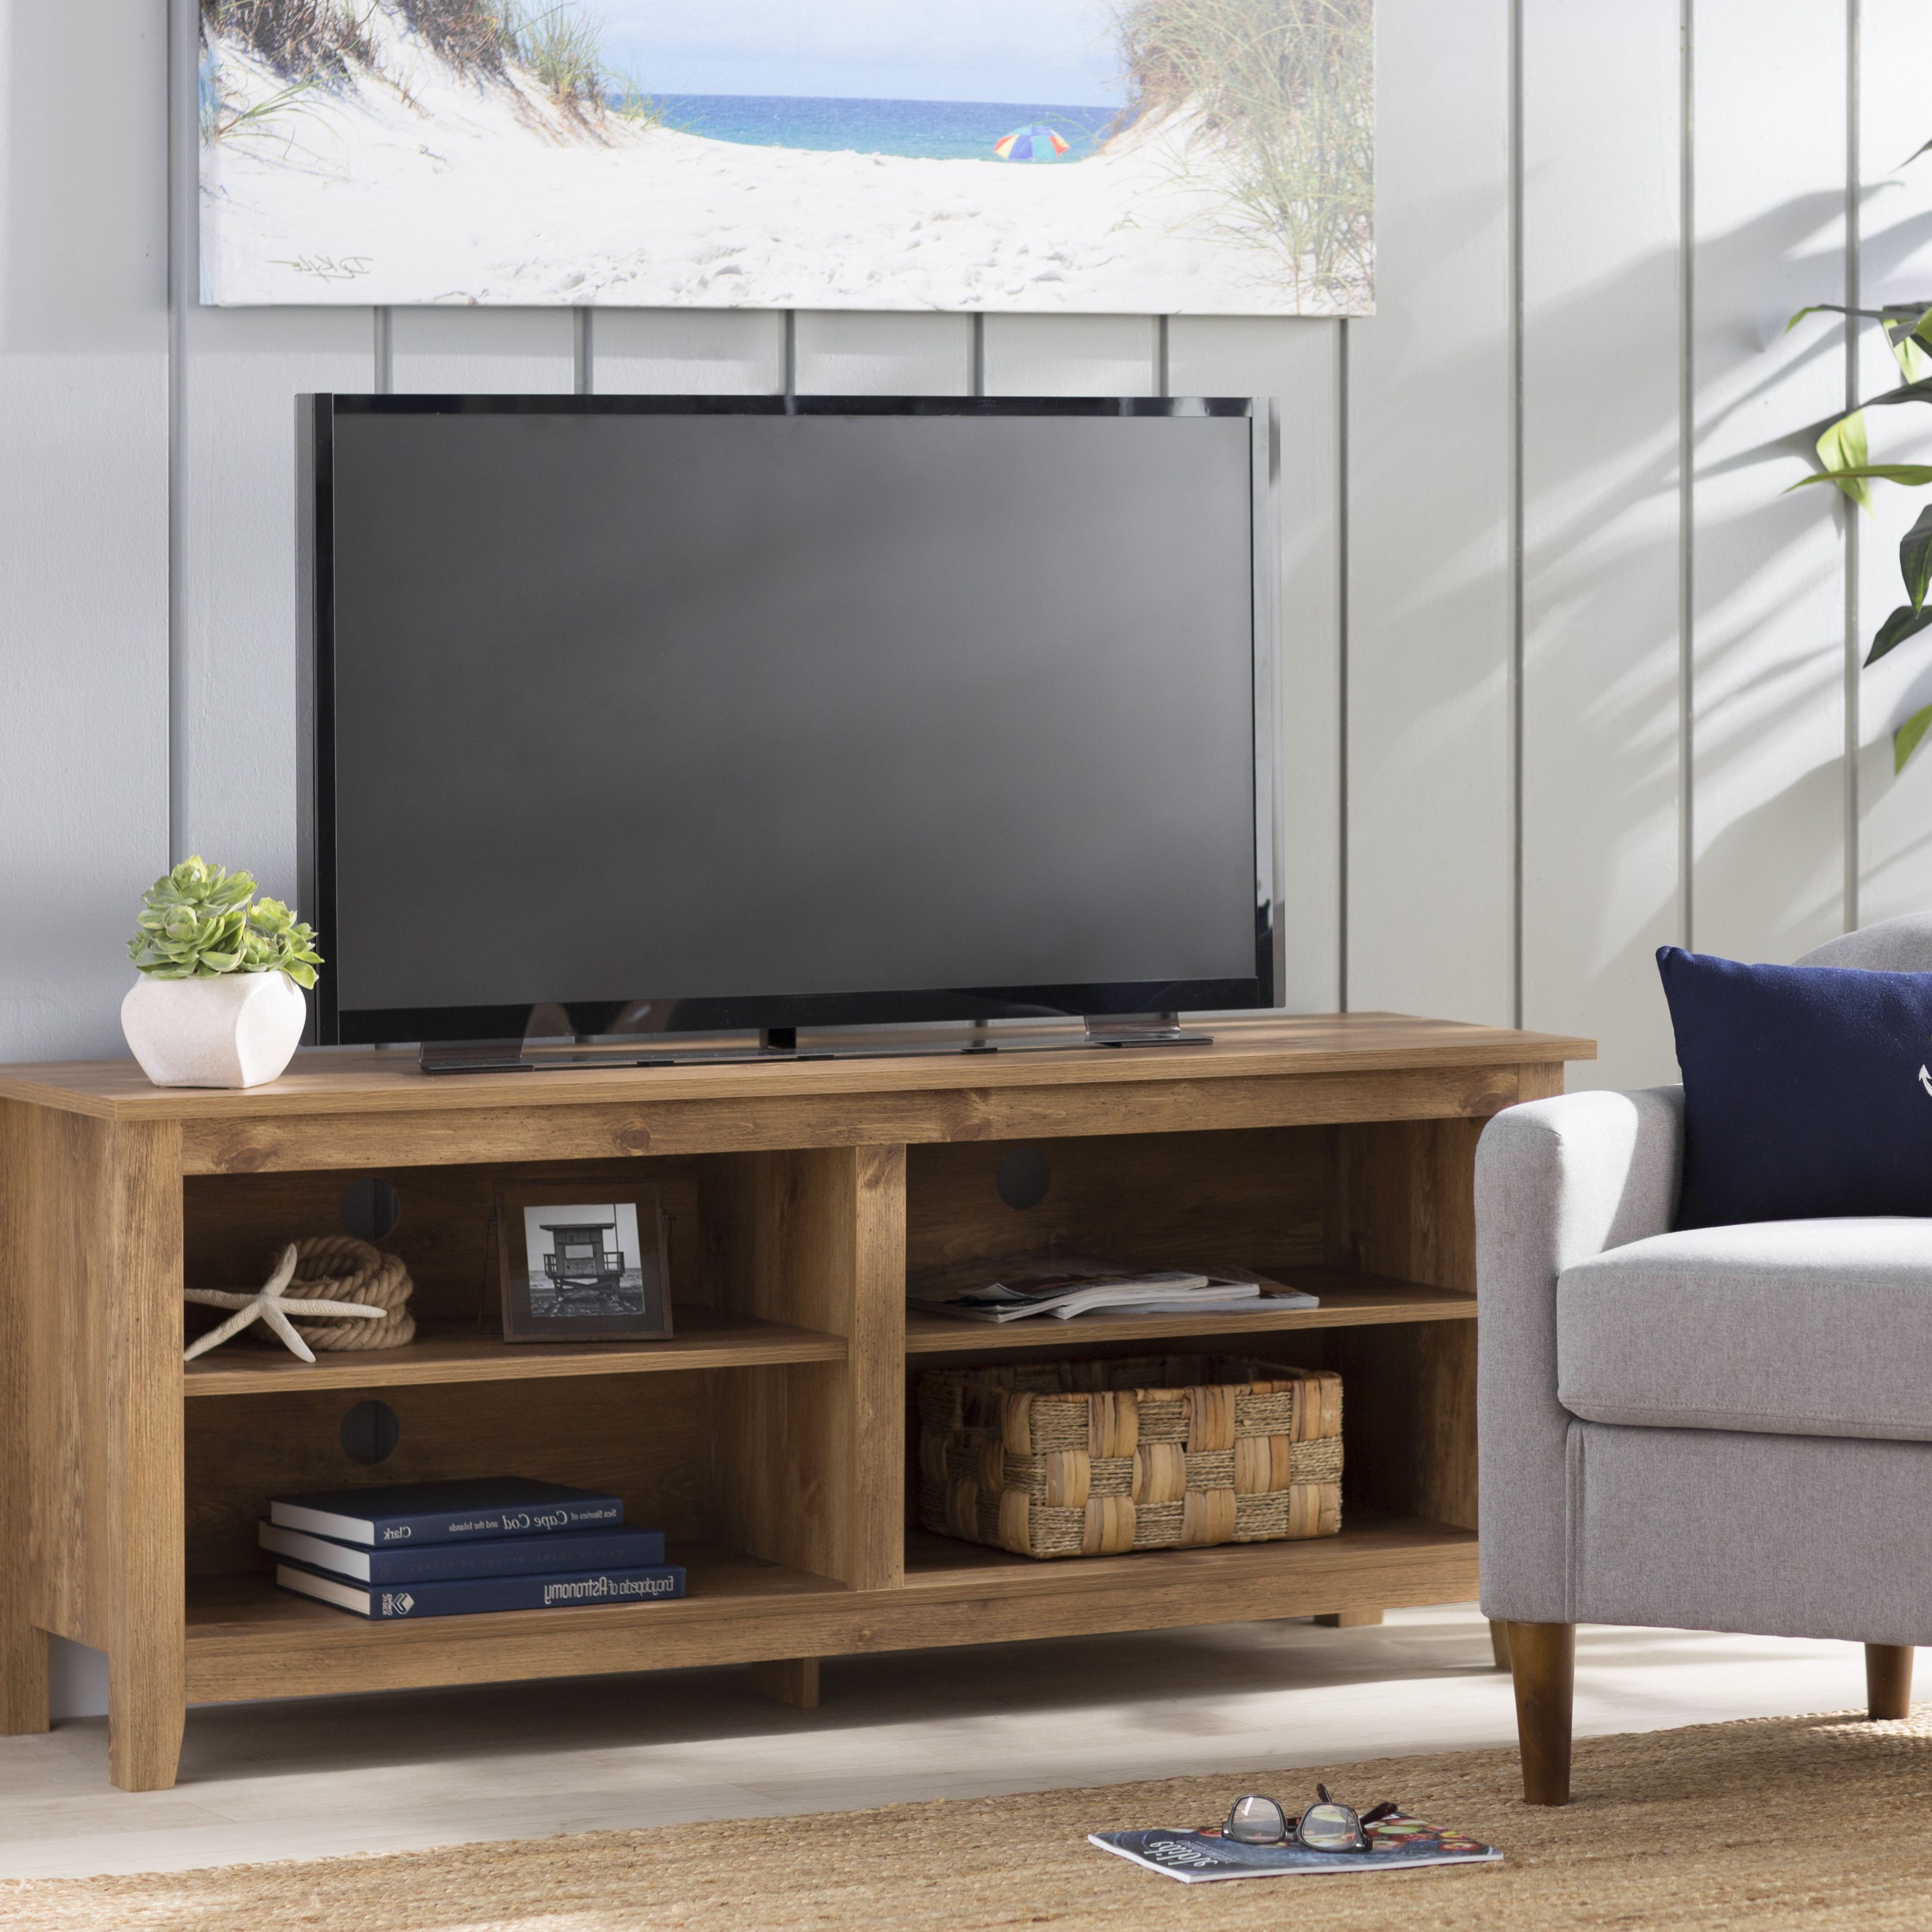 Newest Sinclair Blue 54 Inch Tv Stands Within Tv Stands & Entertainment Centers You'll Love (View 20 of 20)